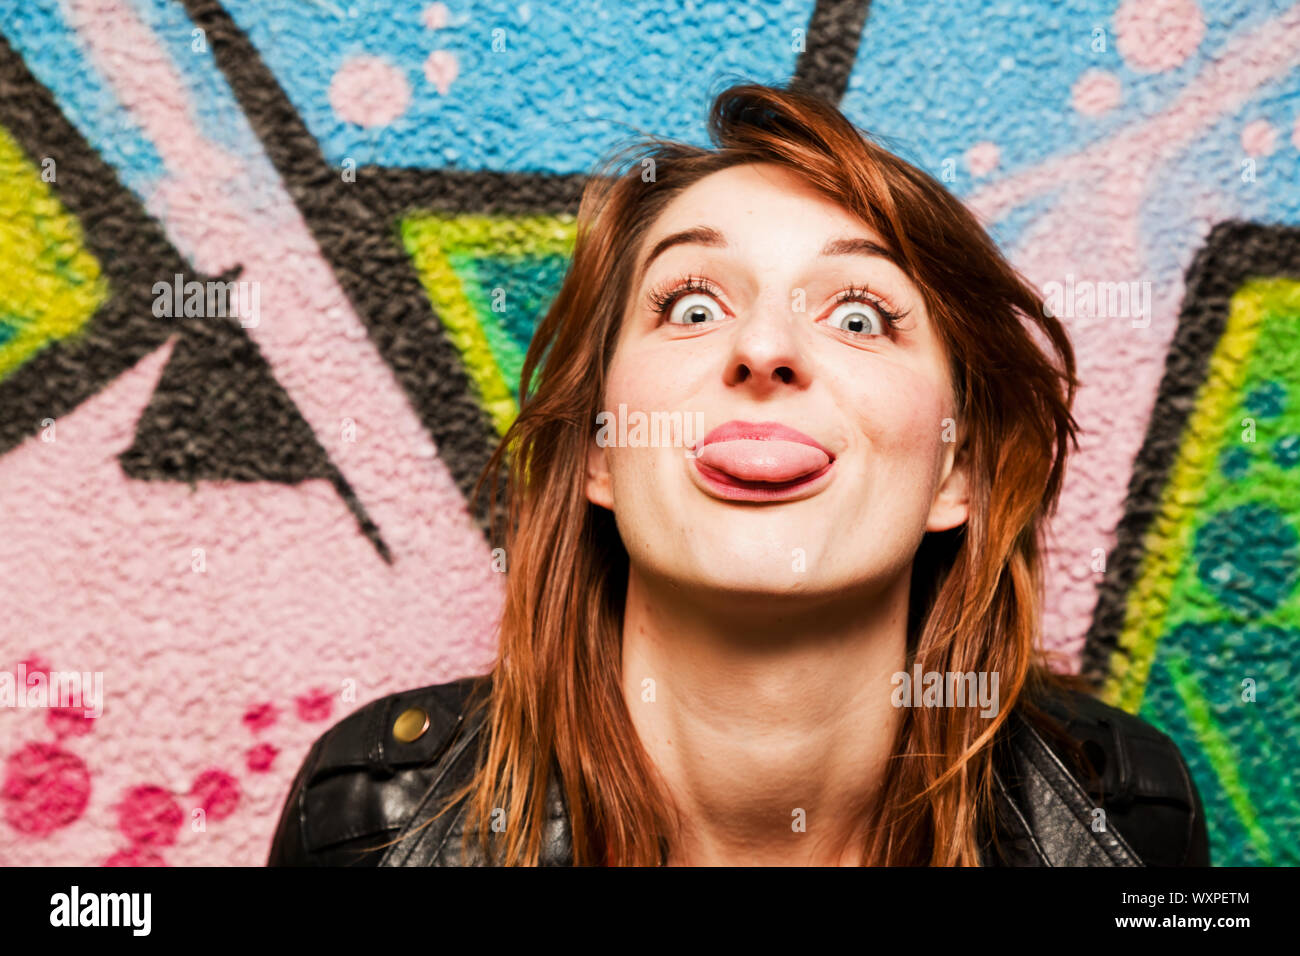 Stylish girl poking out her tongue to the camera against colorful graffiti wall. Stock Photo